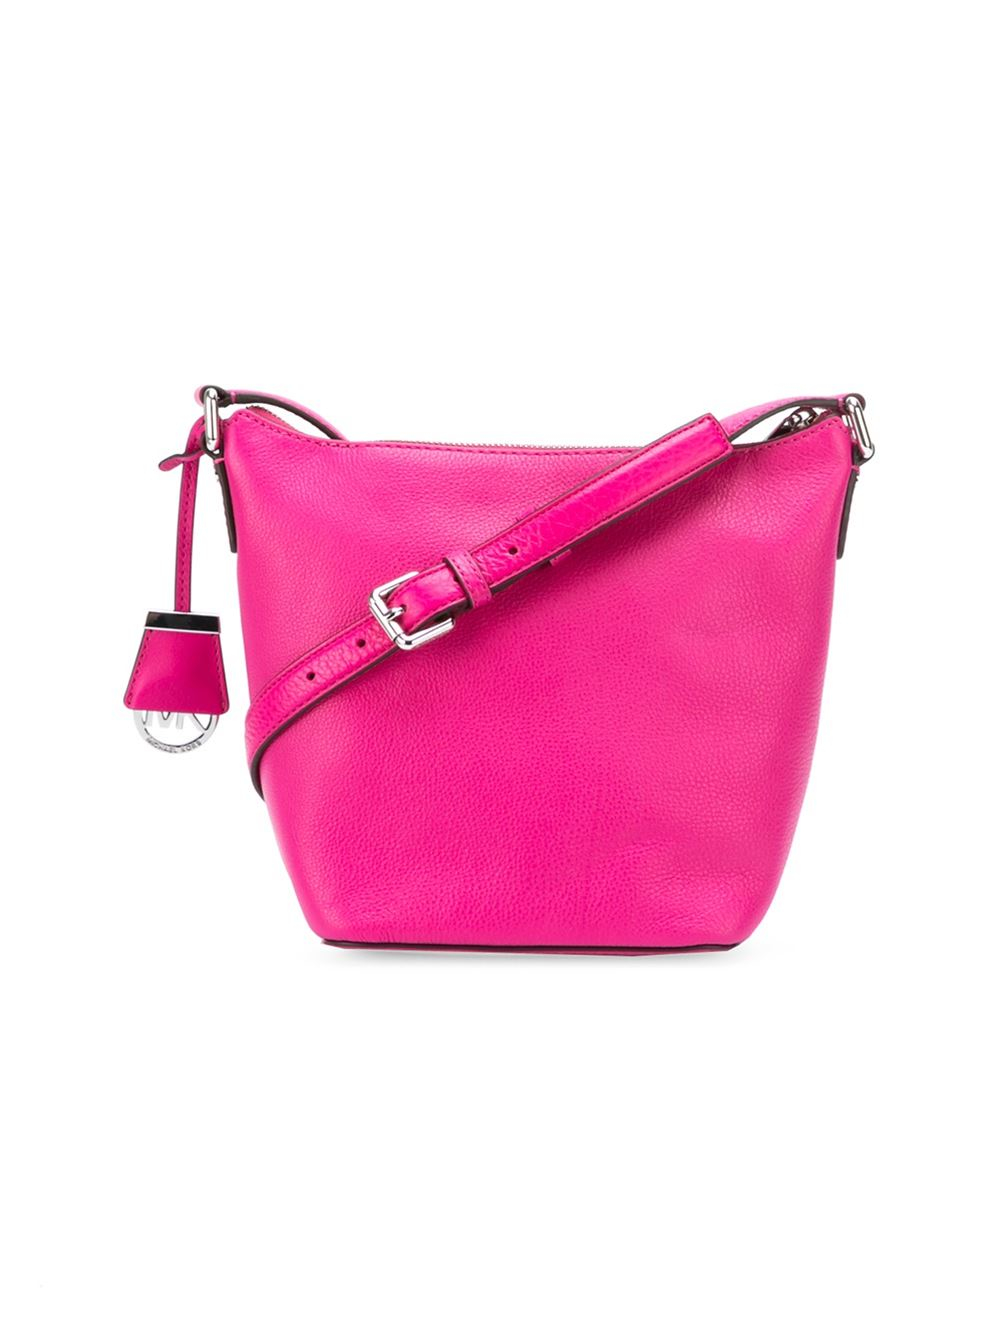 Lyst - Michael Michael Kors Small Bedford Leather Messenger Bag in Pink